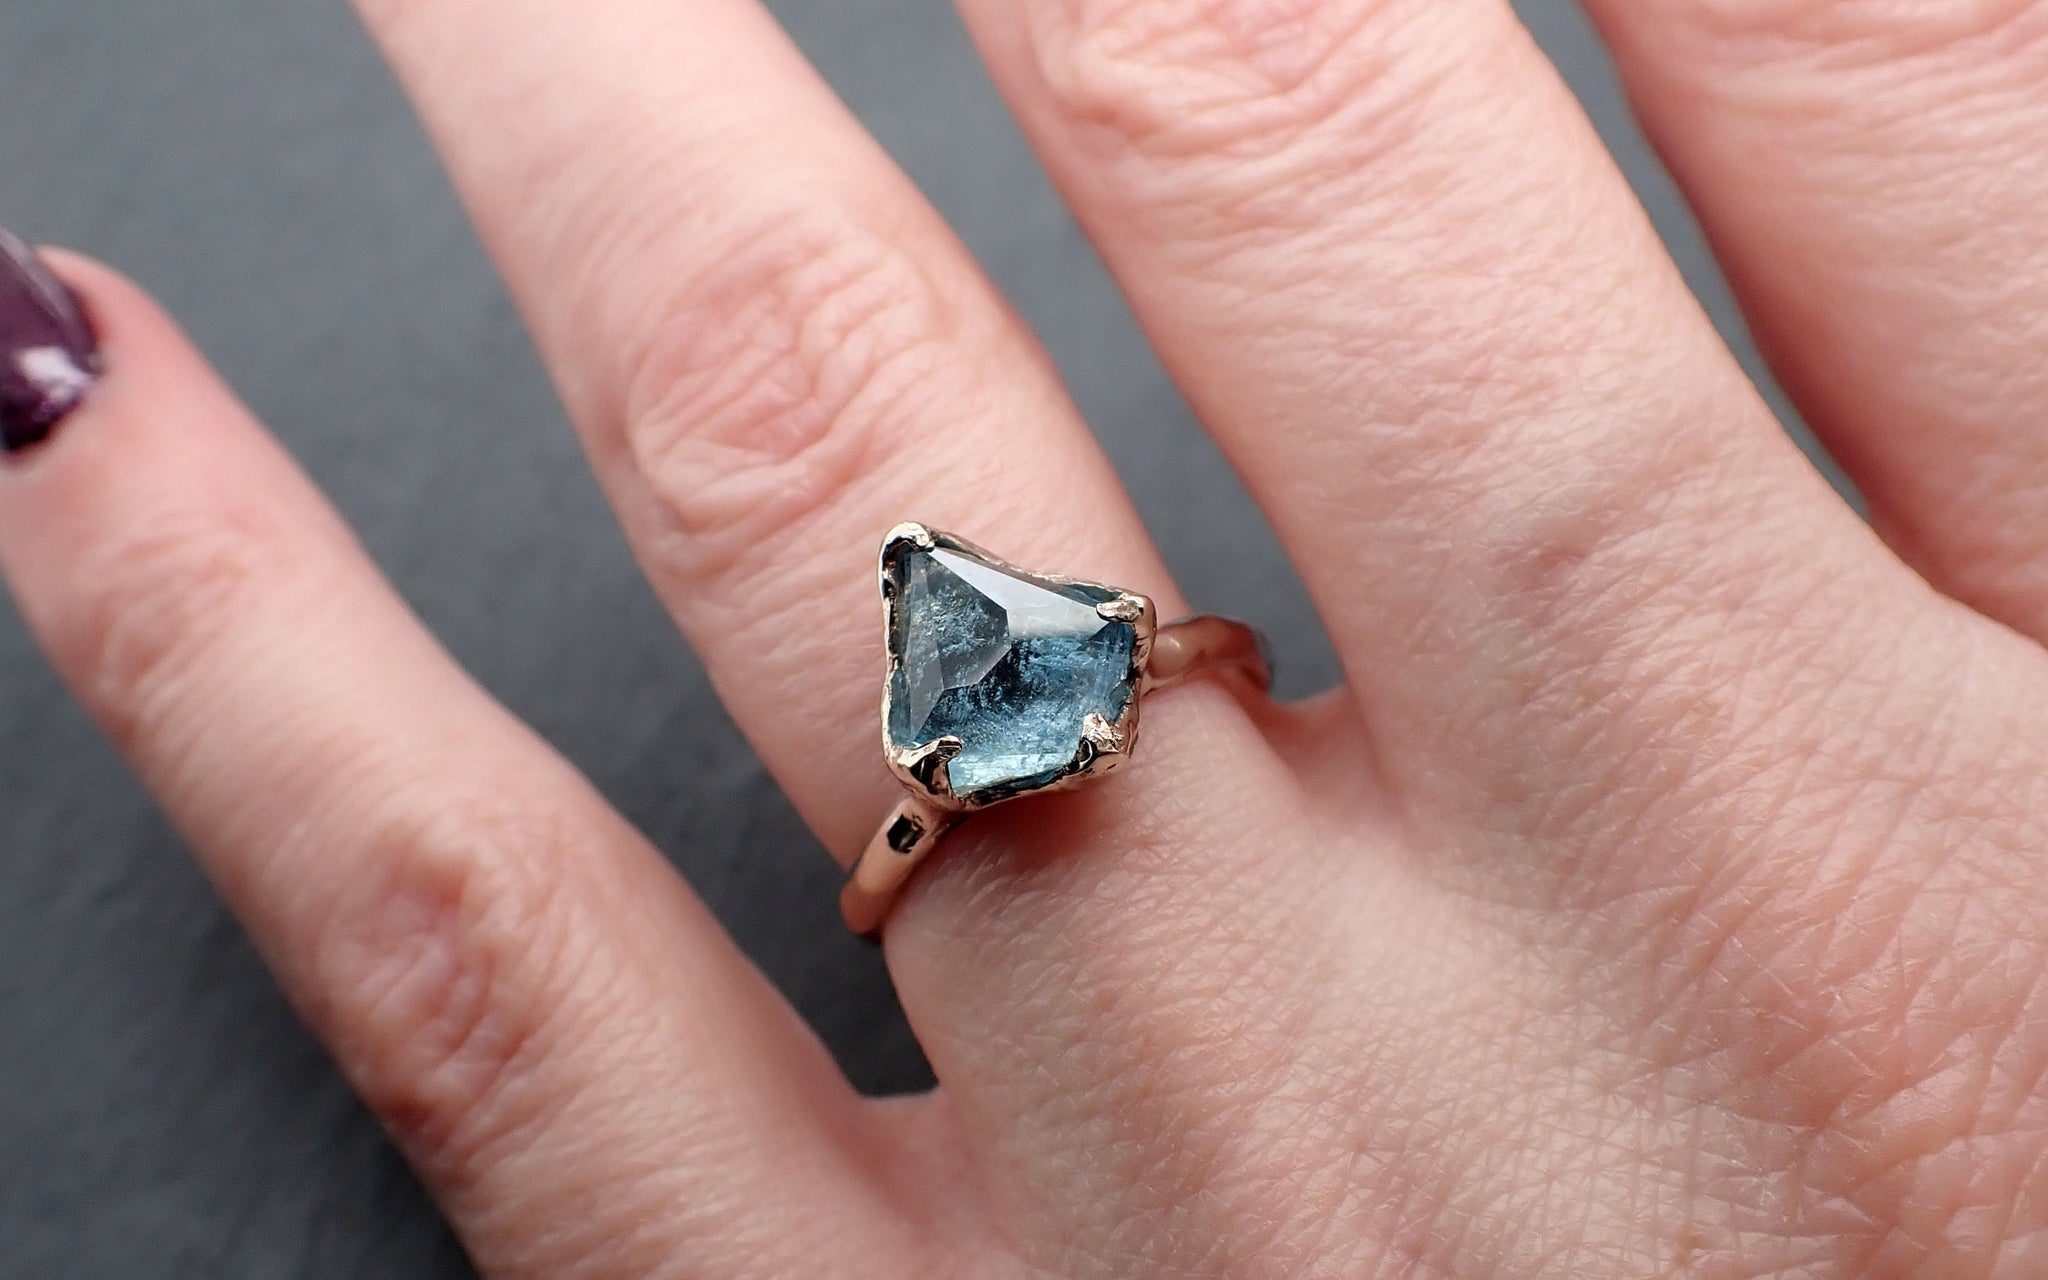 Partially faceted Aquamarine Solitaire Ring 18k gold Custom One Of a Kind Gemstone Ring Bespoke byAngeline 3356